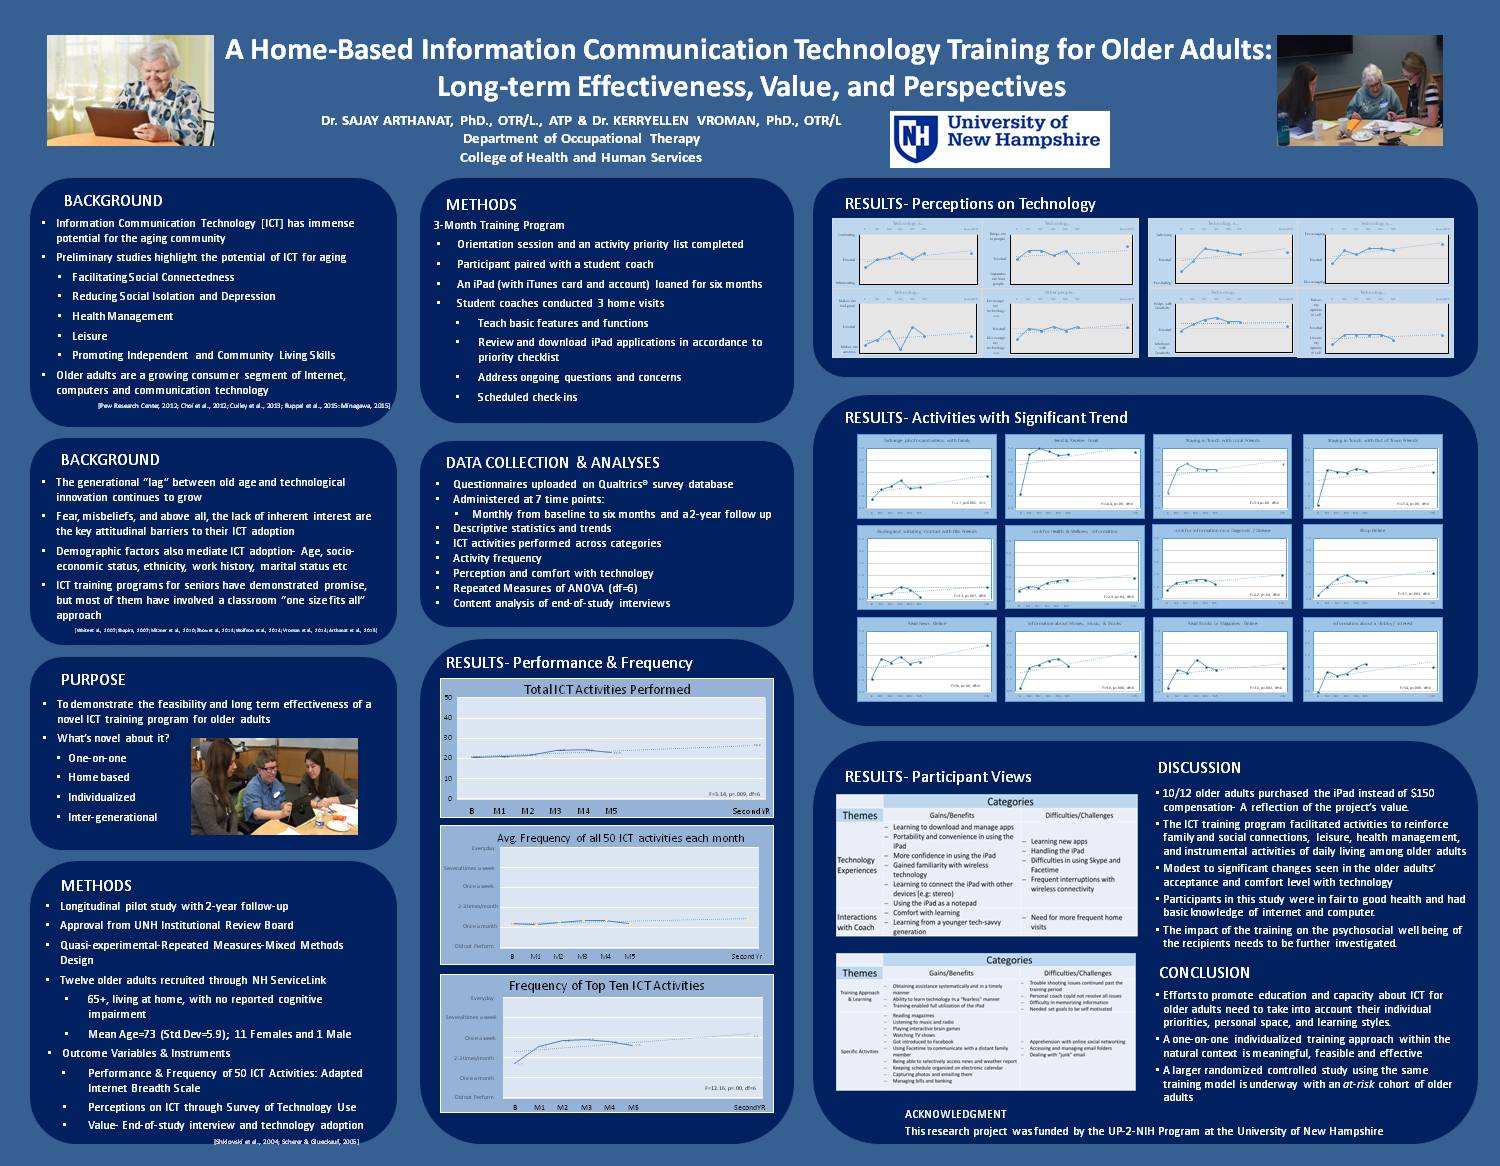 A Home-Based Information Communication Technology Training For Older Adults: Effectiveness, Value, And Perspectives by sdq24